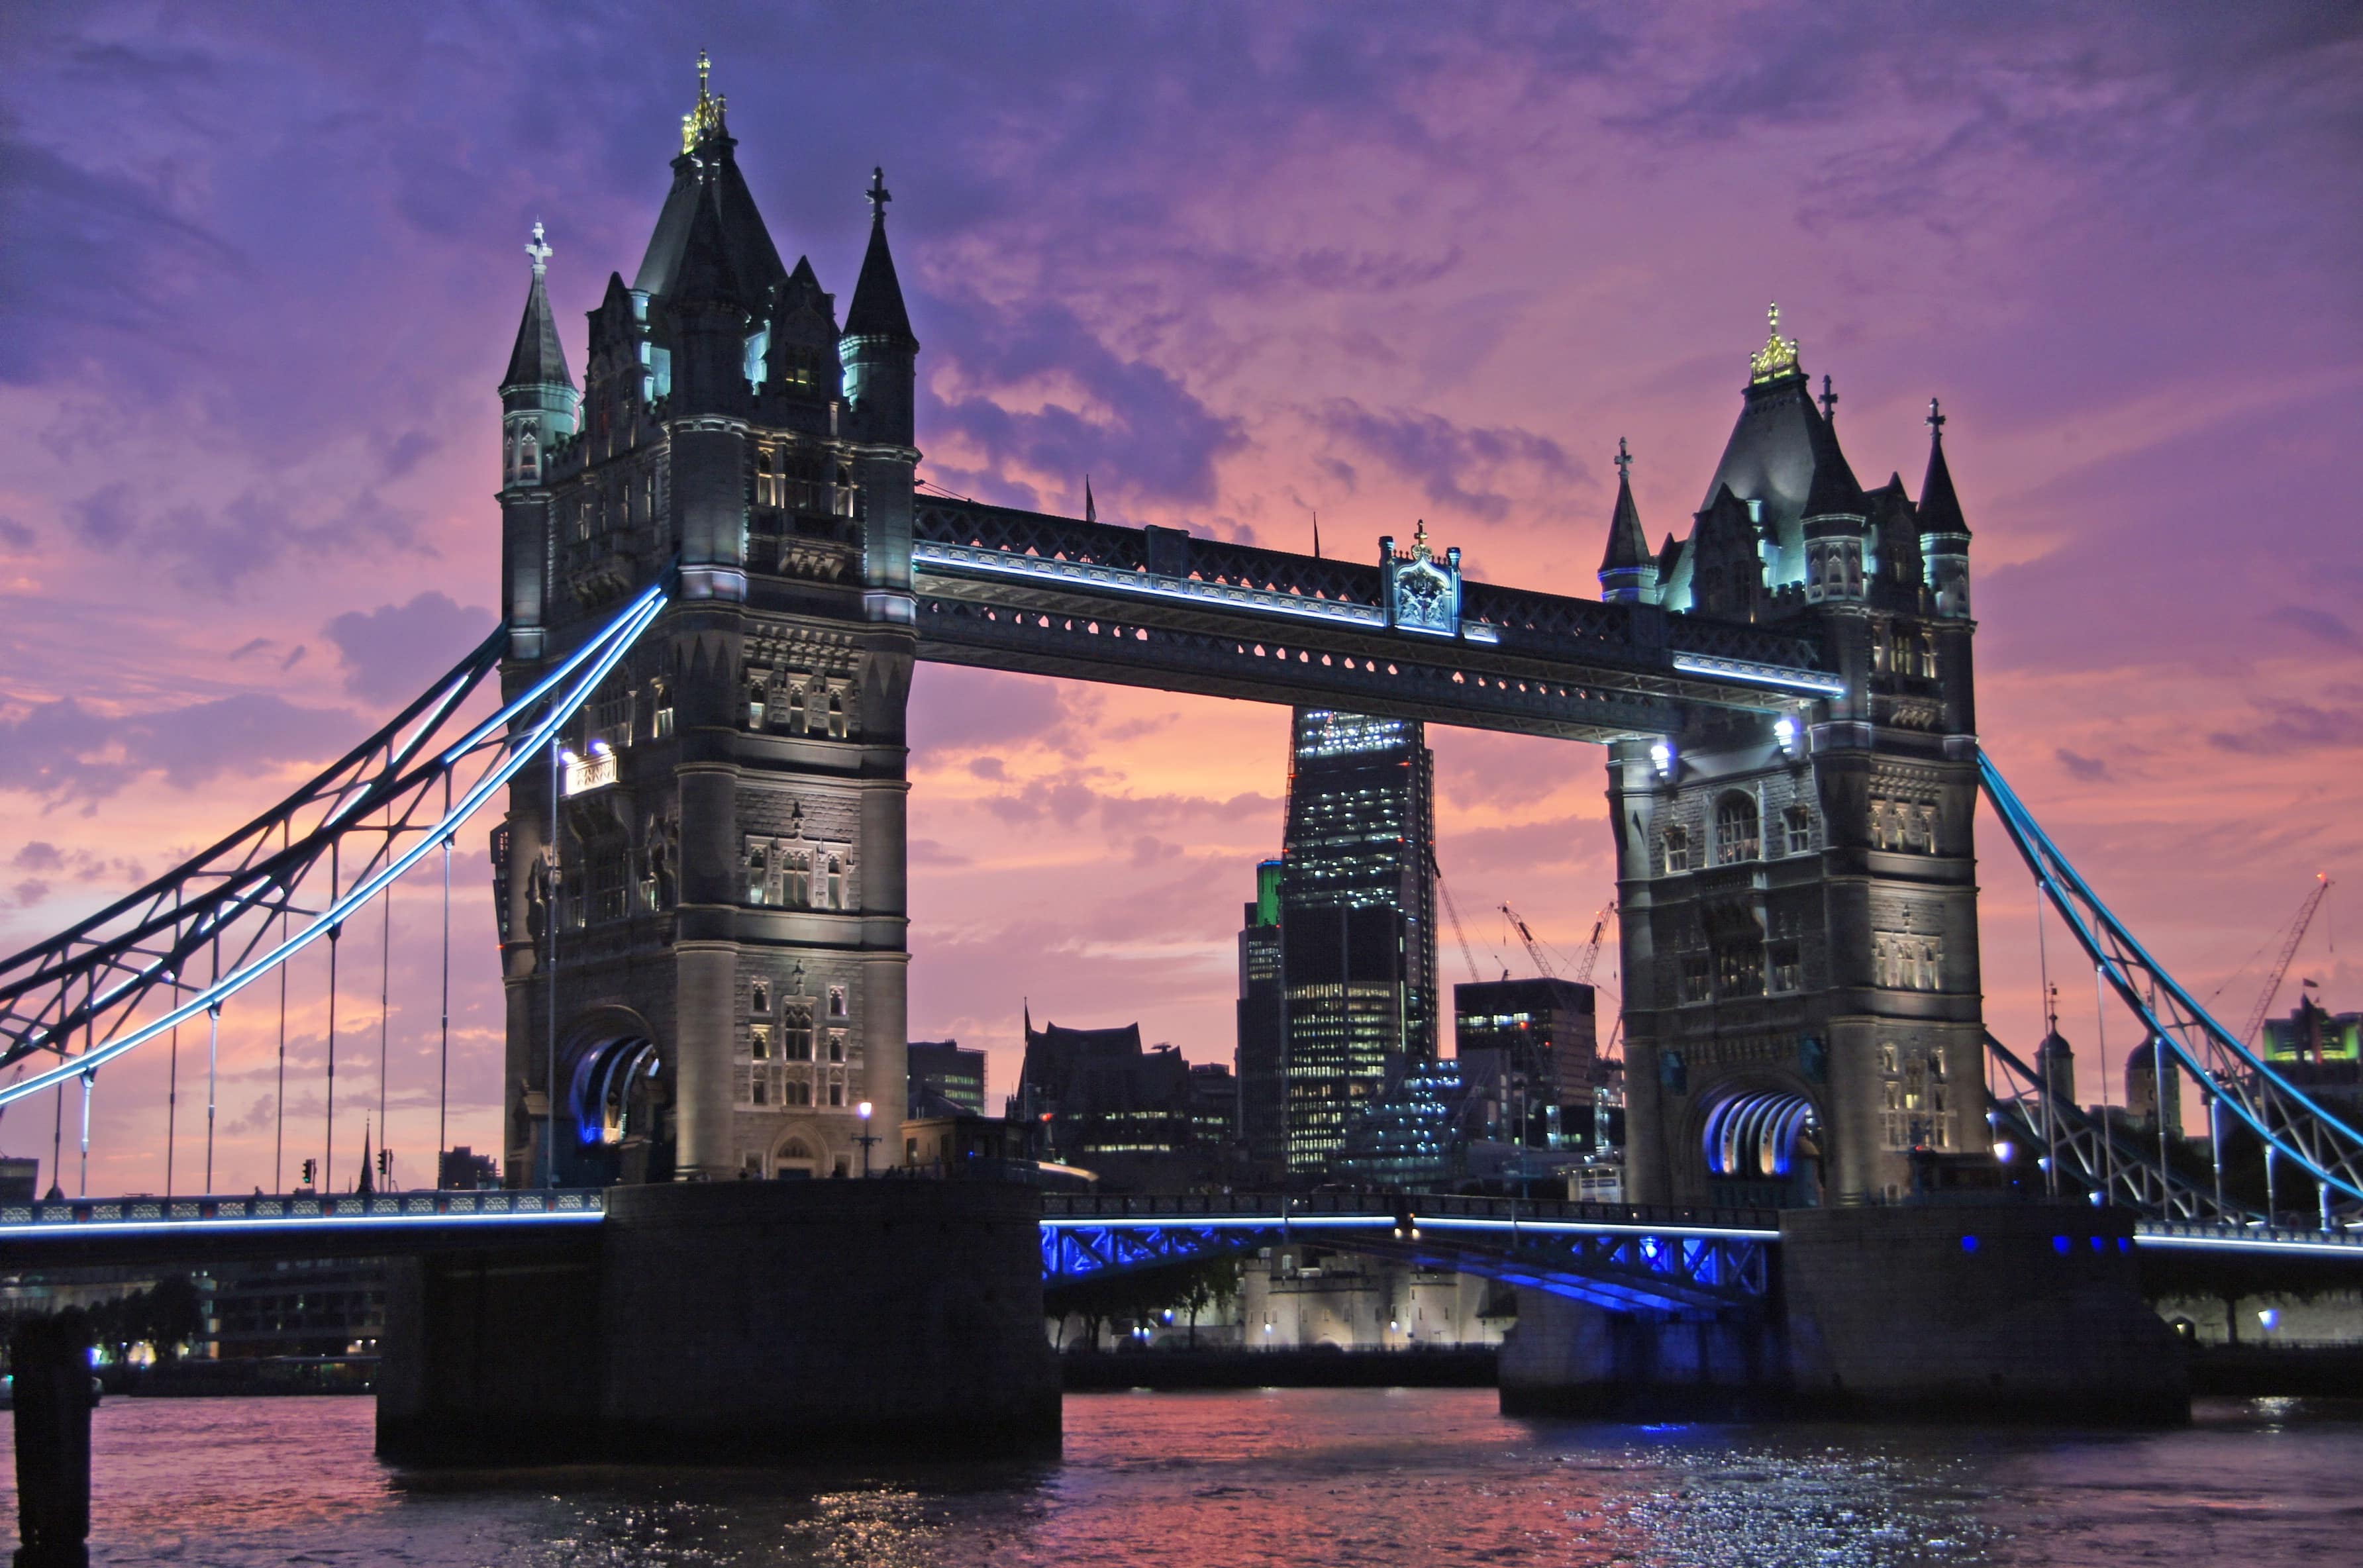 A London city break will give you the chance to visit outstanding attractions